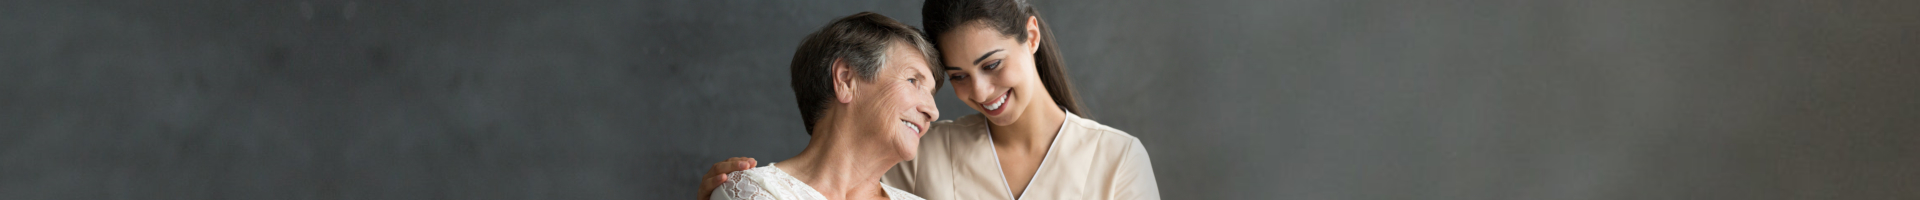 elder woman smiling with female caregiver